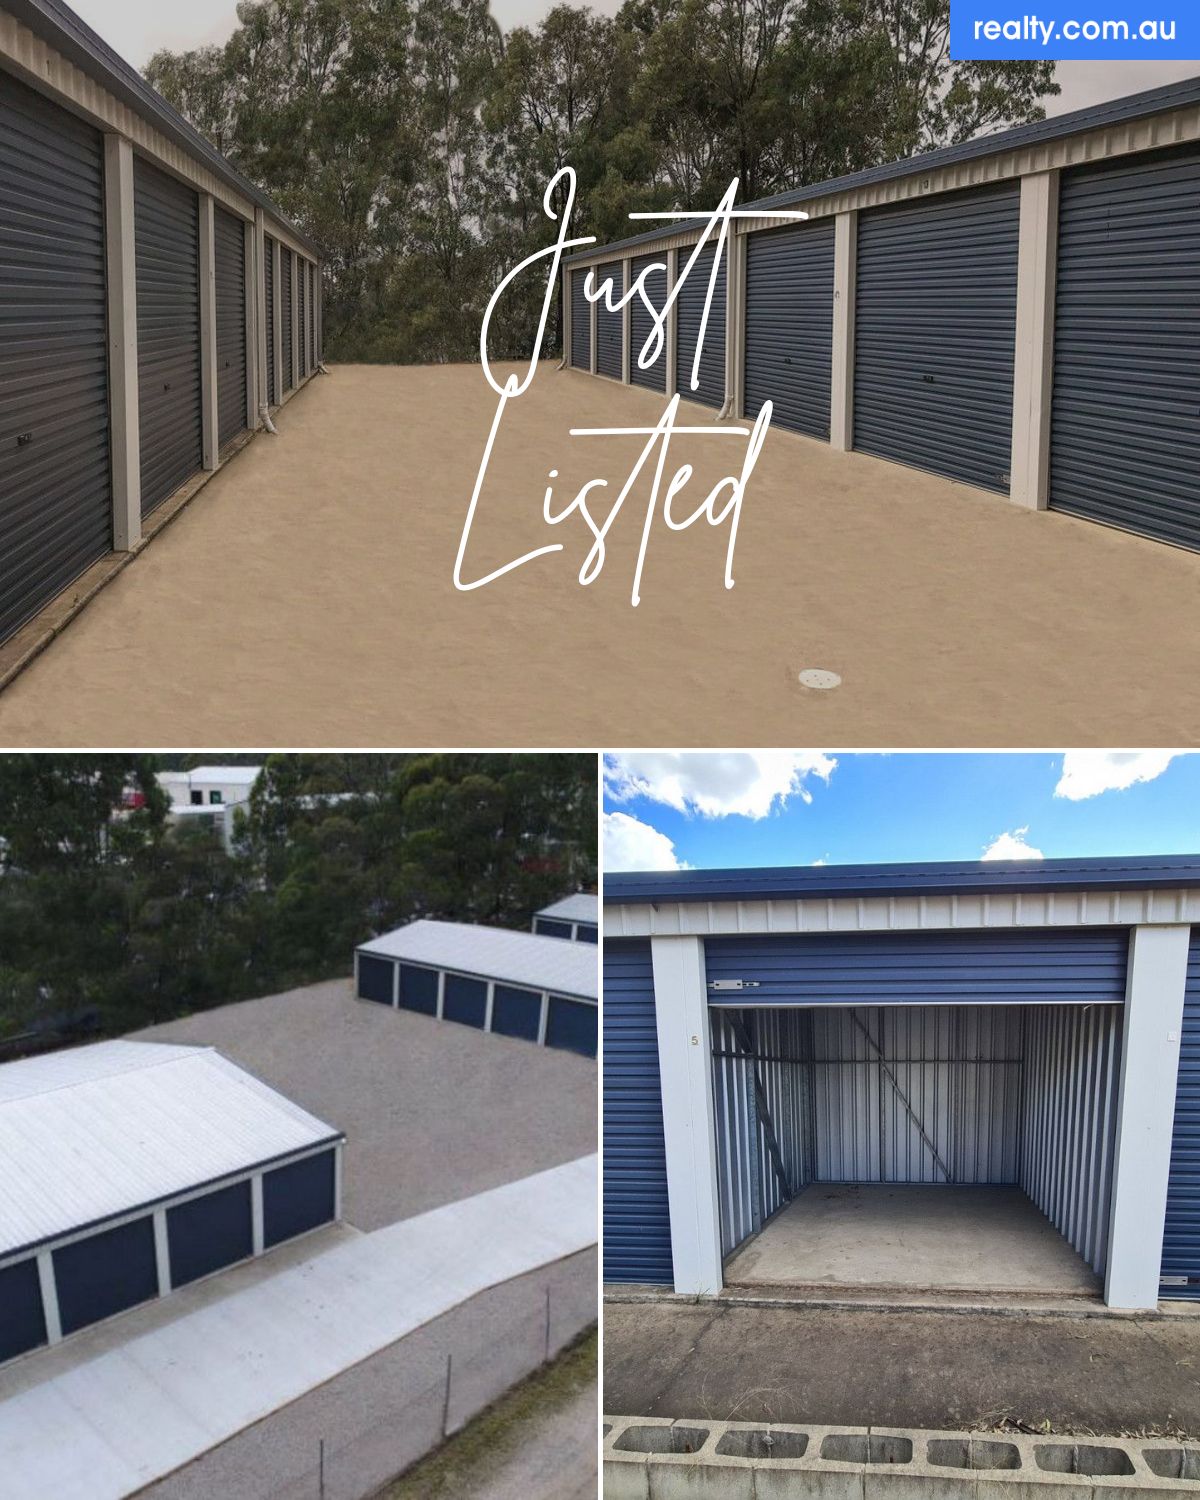 13 Industrial Road (crows Nest Self Storage), Crows Nest, QLD 4355 | Realty.com.au